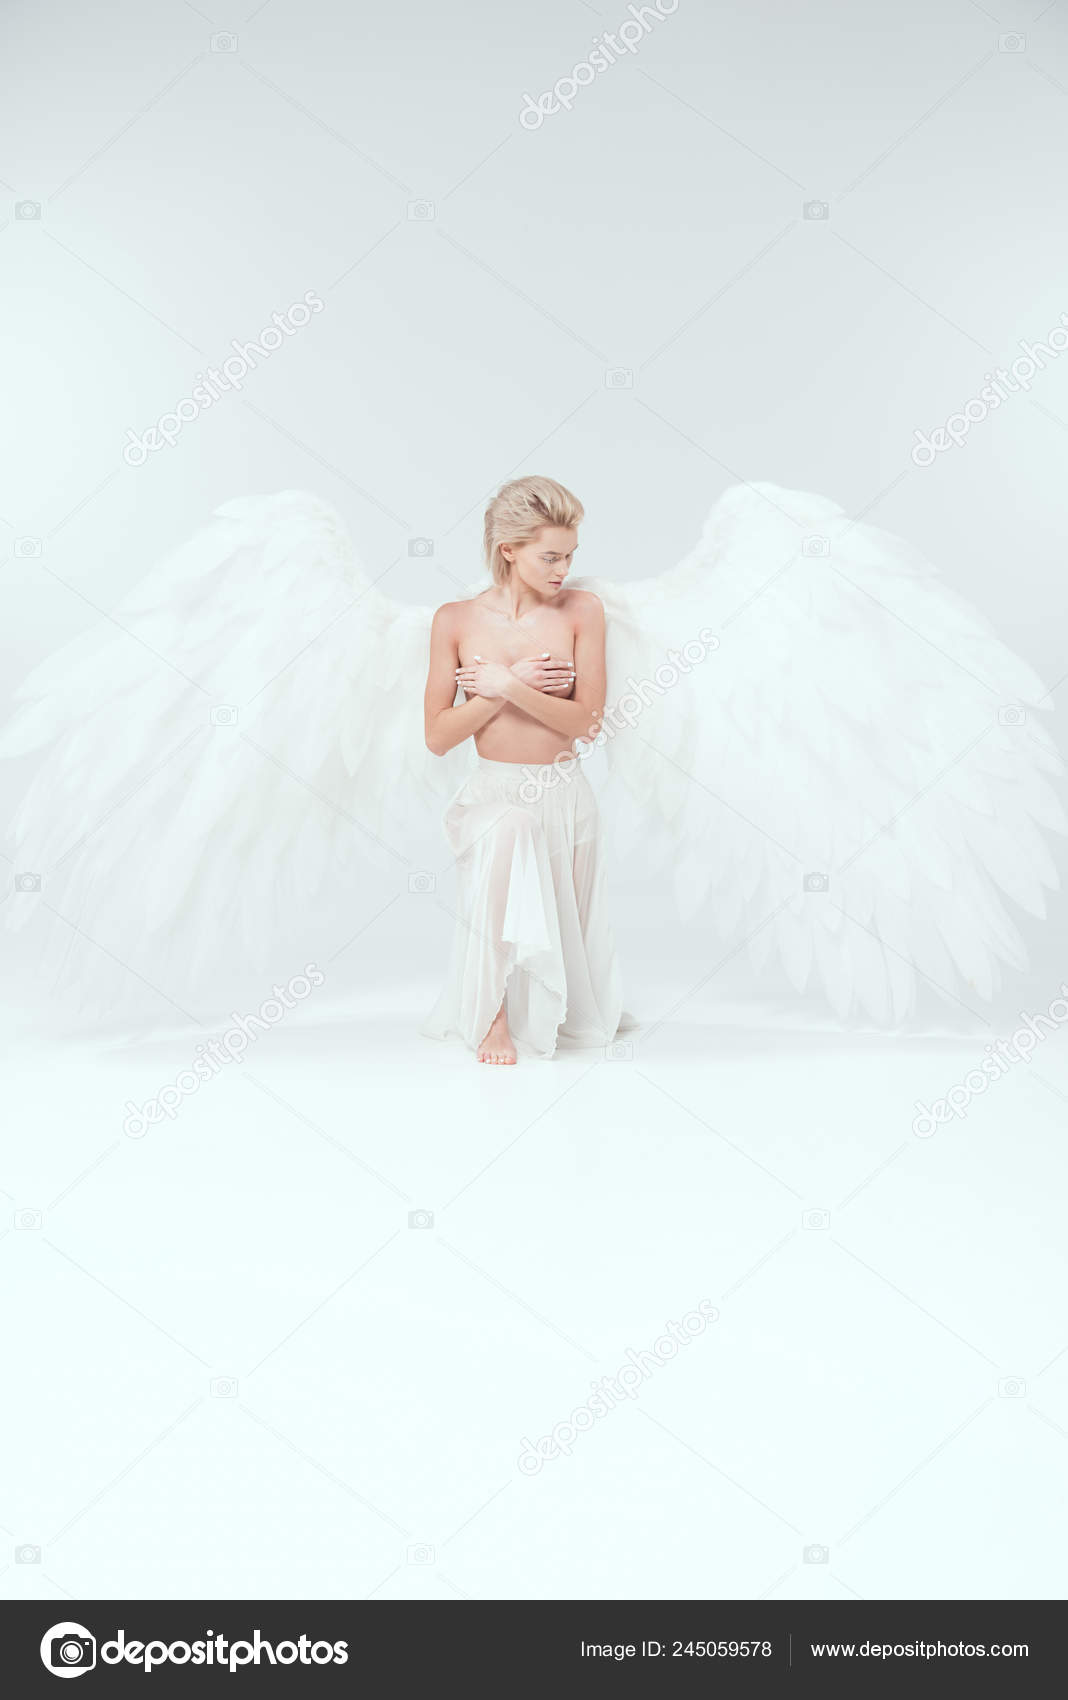 Premium Photo  A woman with a large breast and wings on her chest